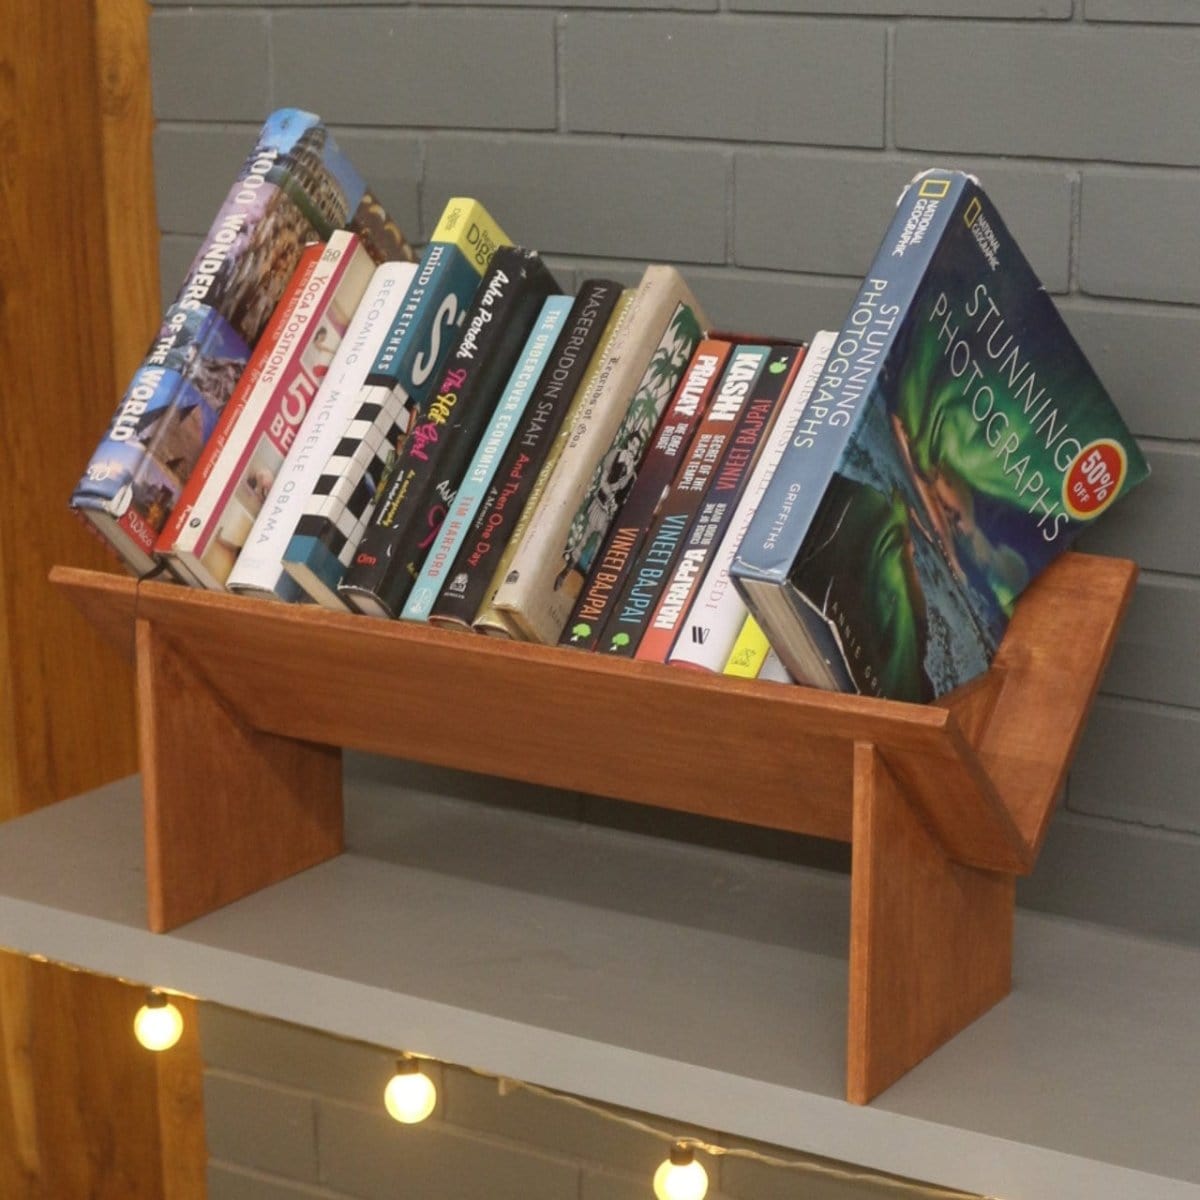 Barish Book Rack (Table Top) For Larger Books Firewood BH0141FW Best Home Decor Handcrafted